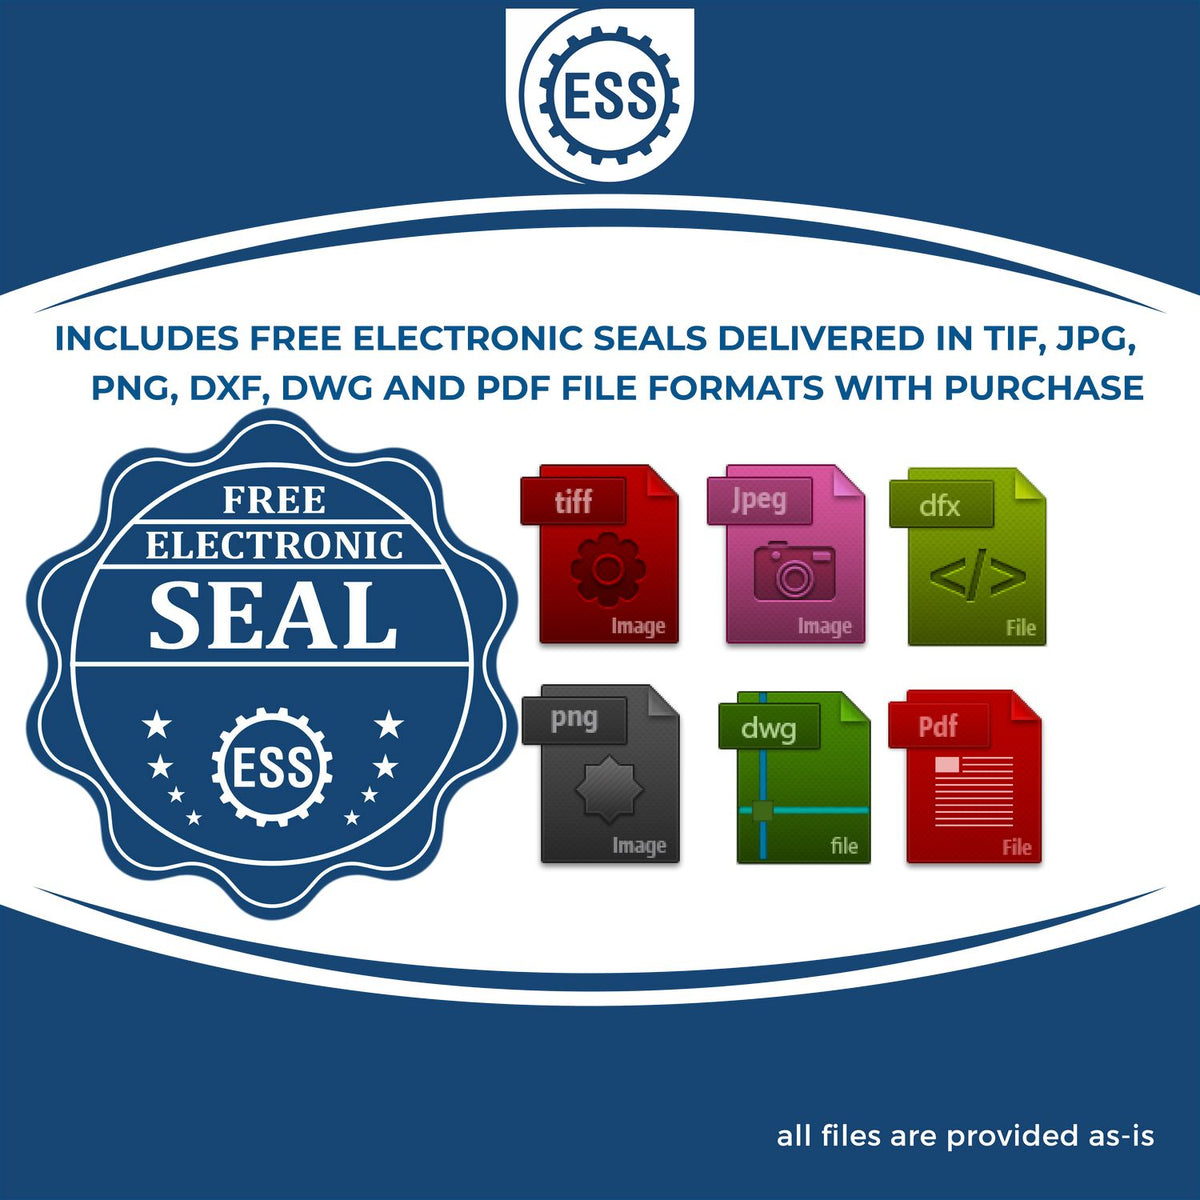 An infographic for the free electronic seal for the Heavy Duty Cast Iron Alaska Land Surveyor Seal Embosser illustrating the different file type icons such as DXF, DWG, TIF, JPG and PNG.